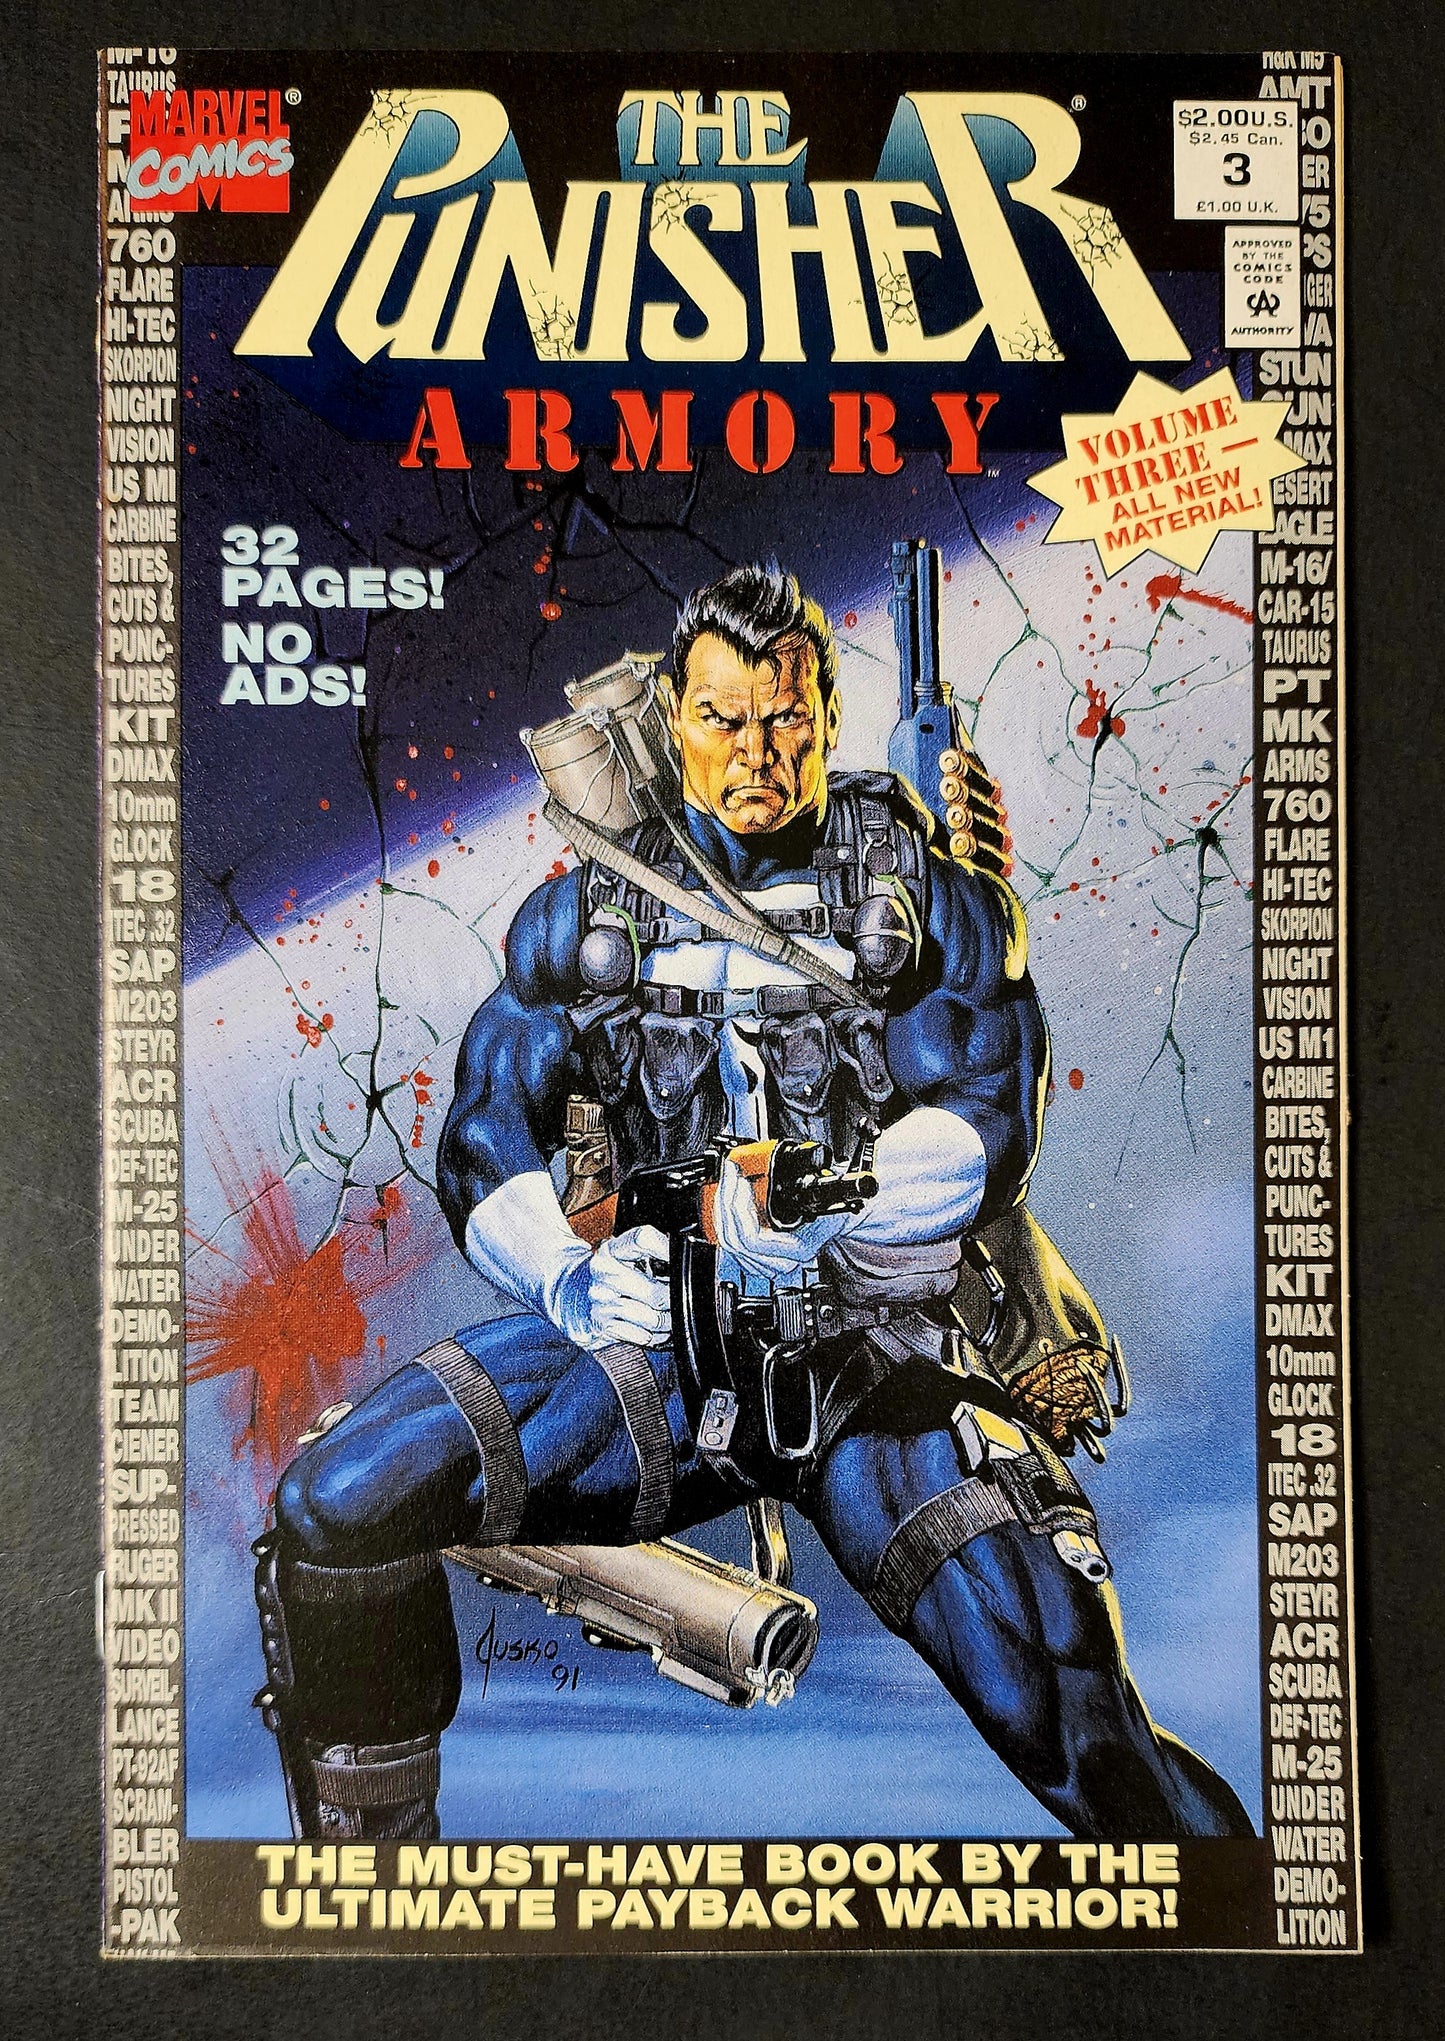 The Punisher Armory #3 (VF+)